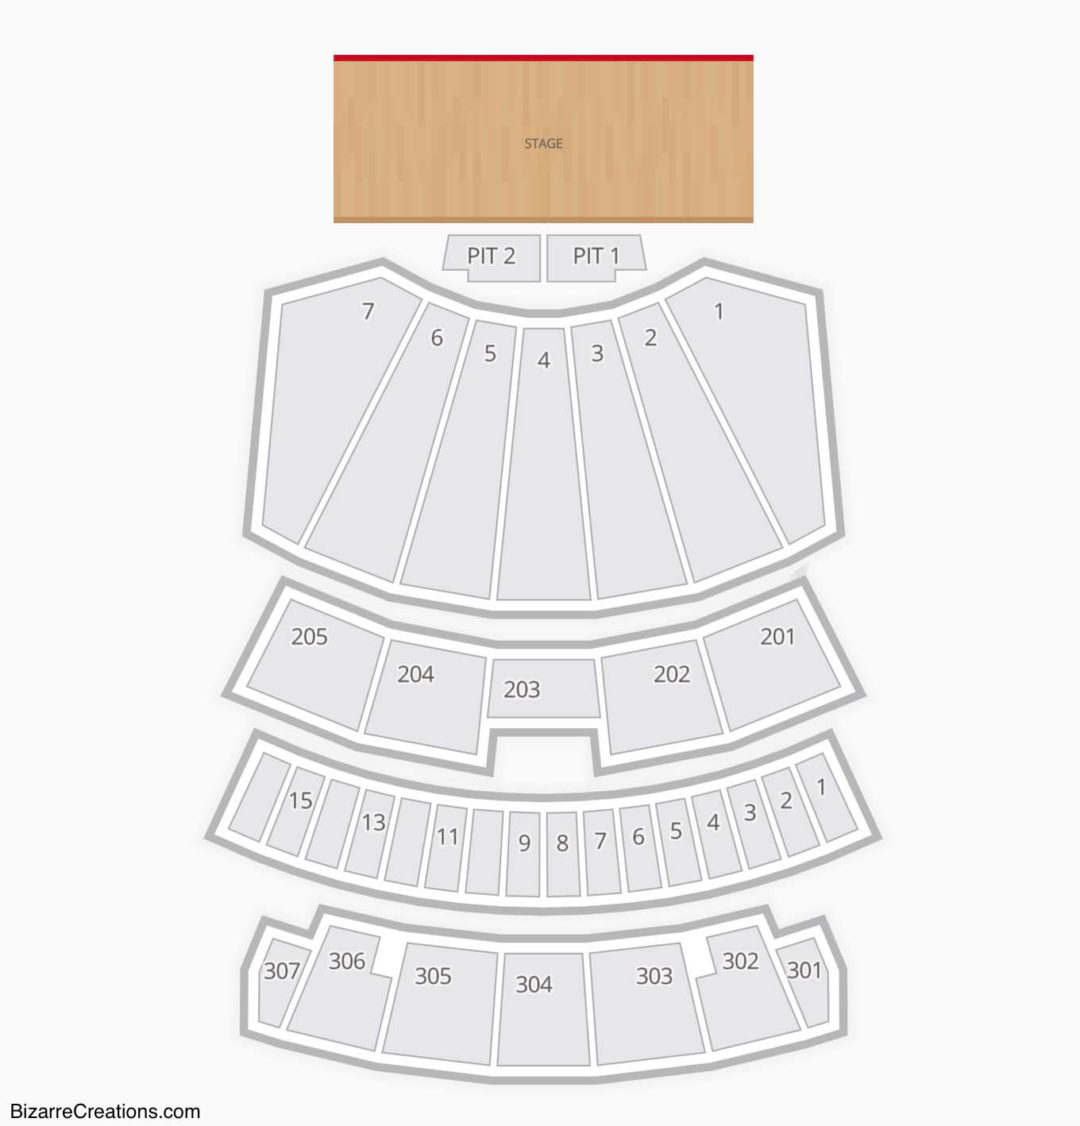 Comerica Theatre Seating Chart | Seating Charts & Tickets